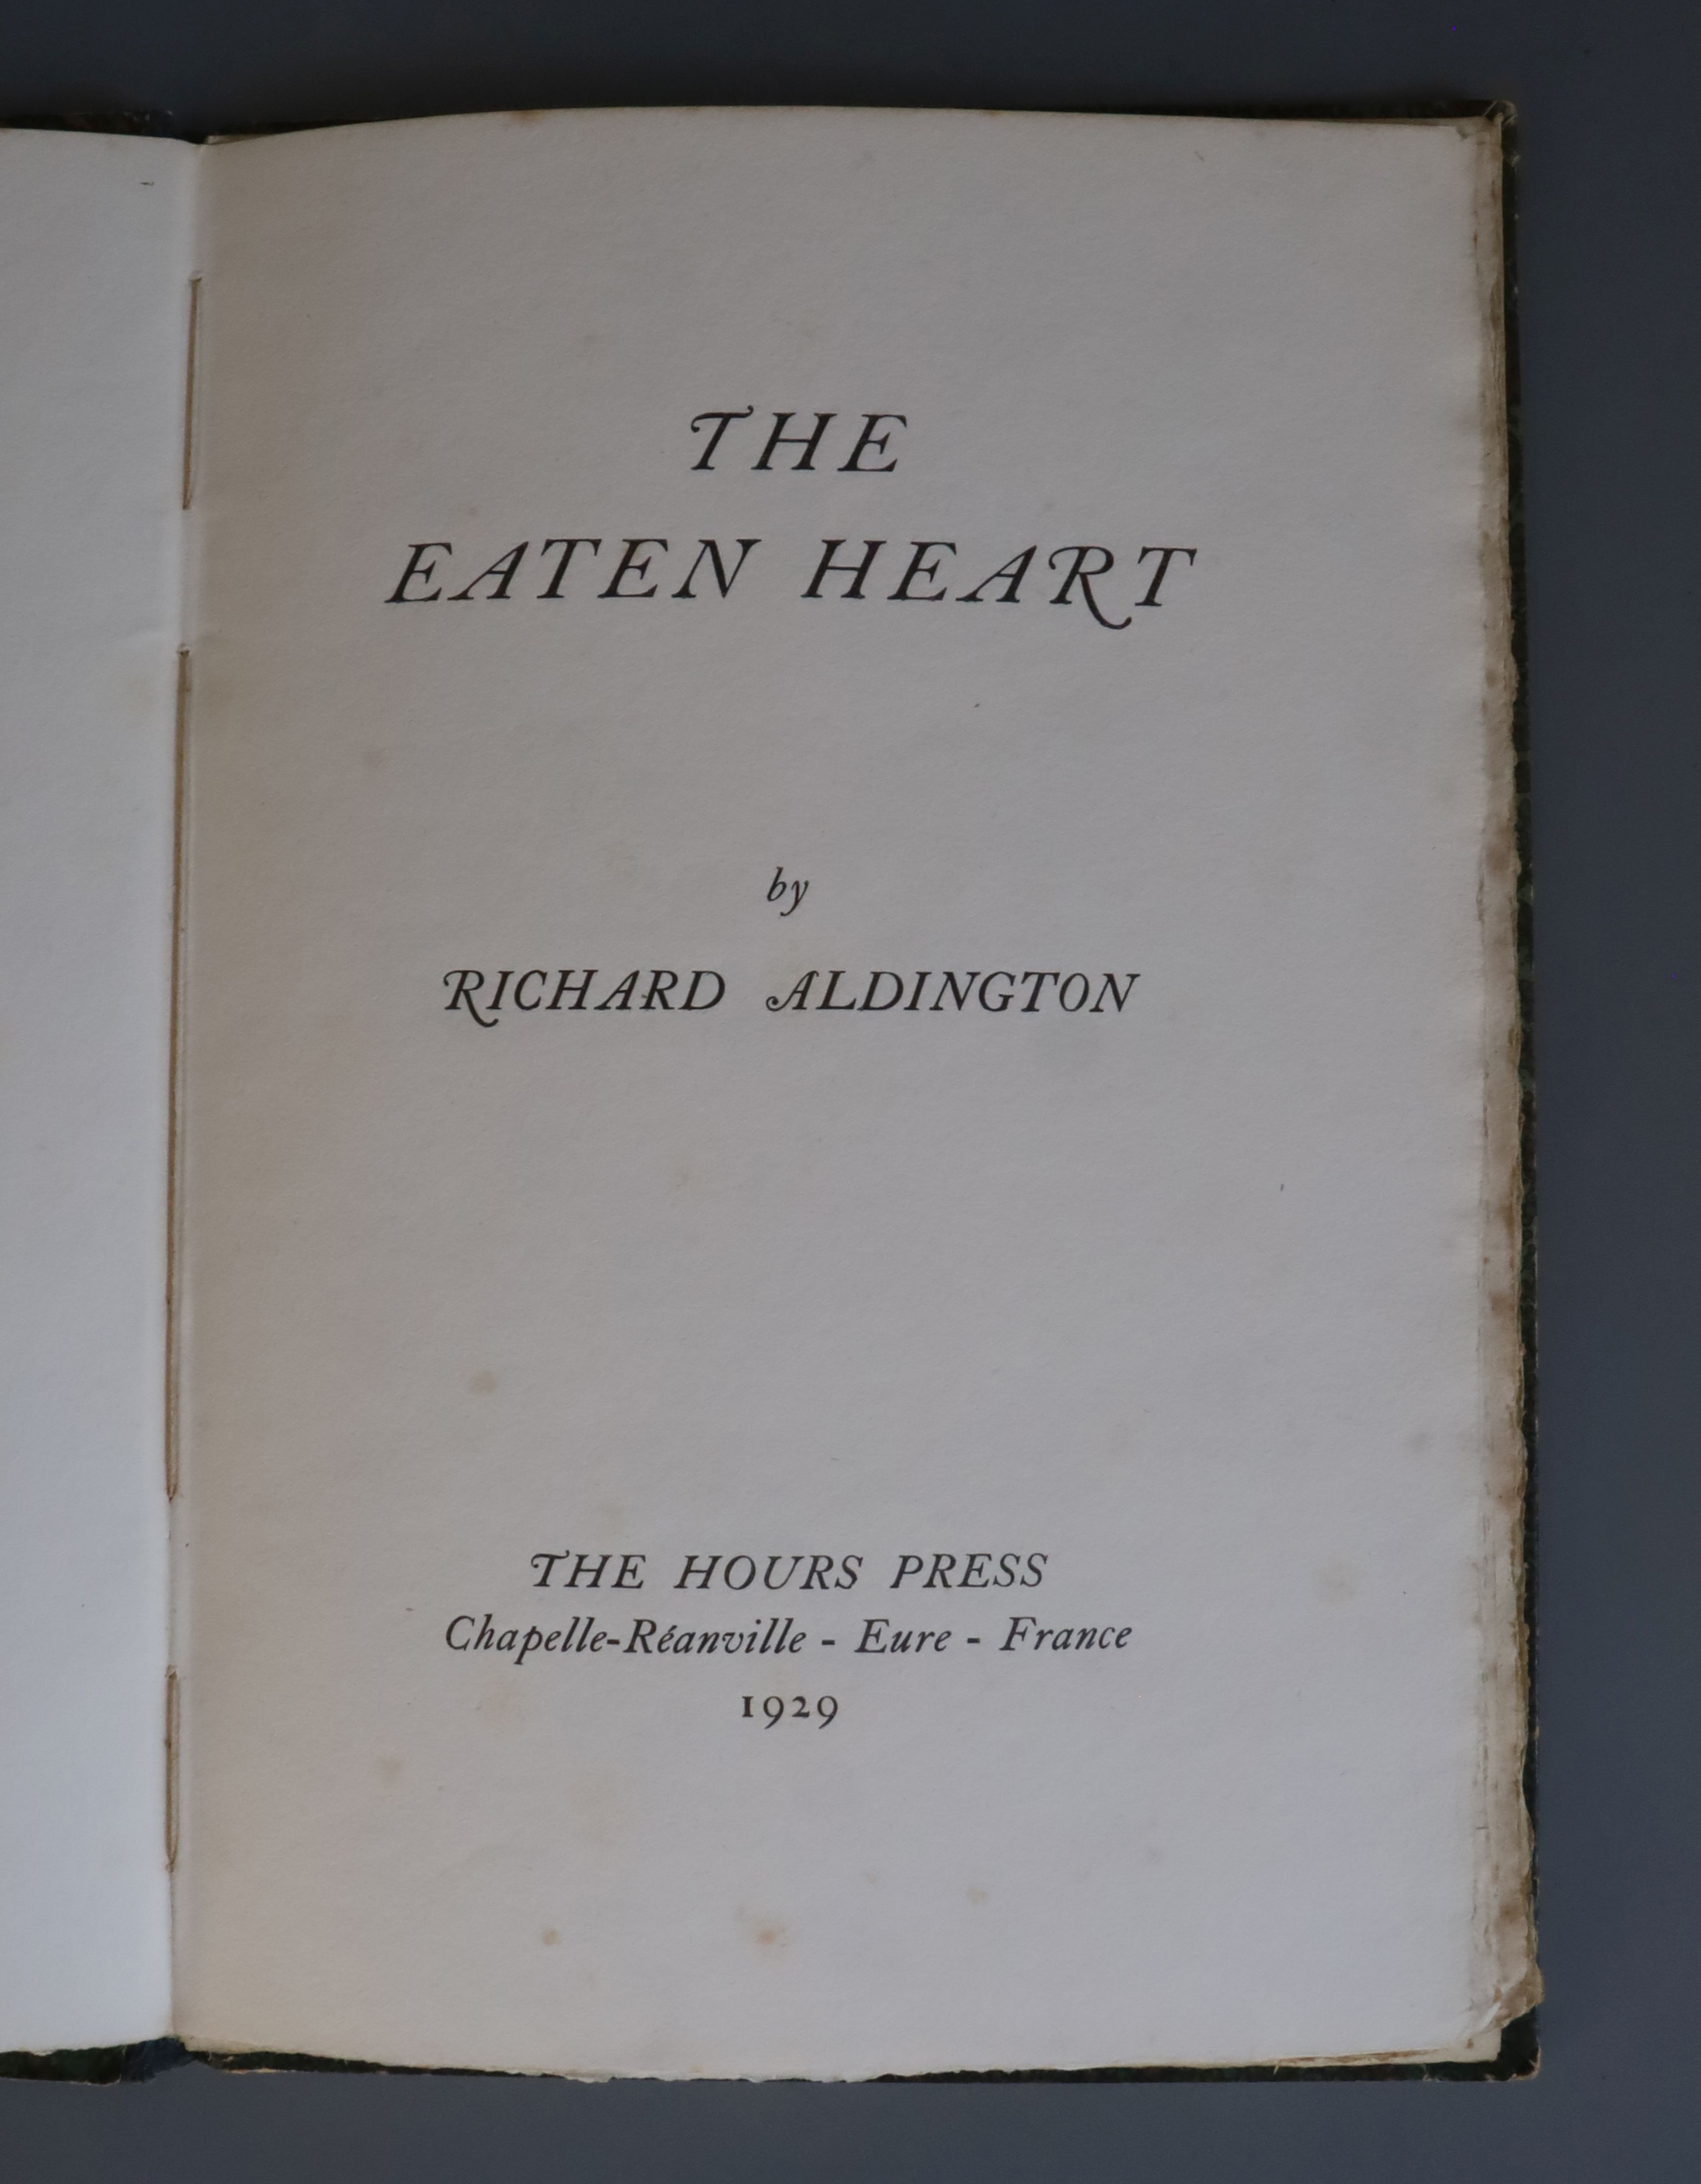 Adlington, Richard - The Eaten Heart, number 143 of 200, signed by the author, qto, marbled